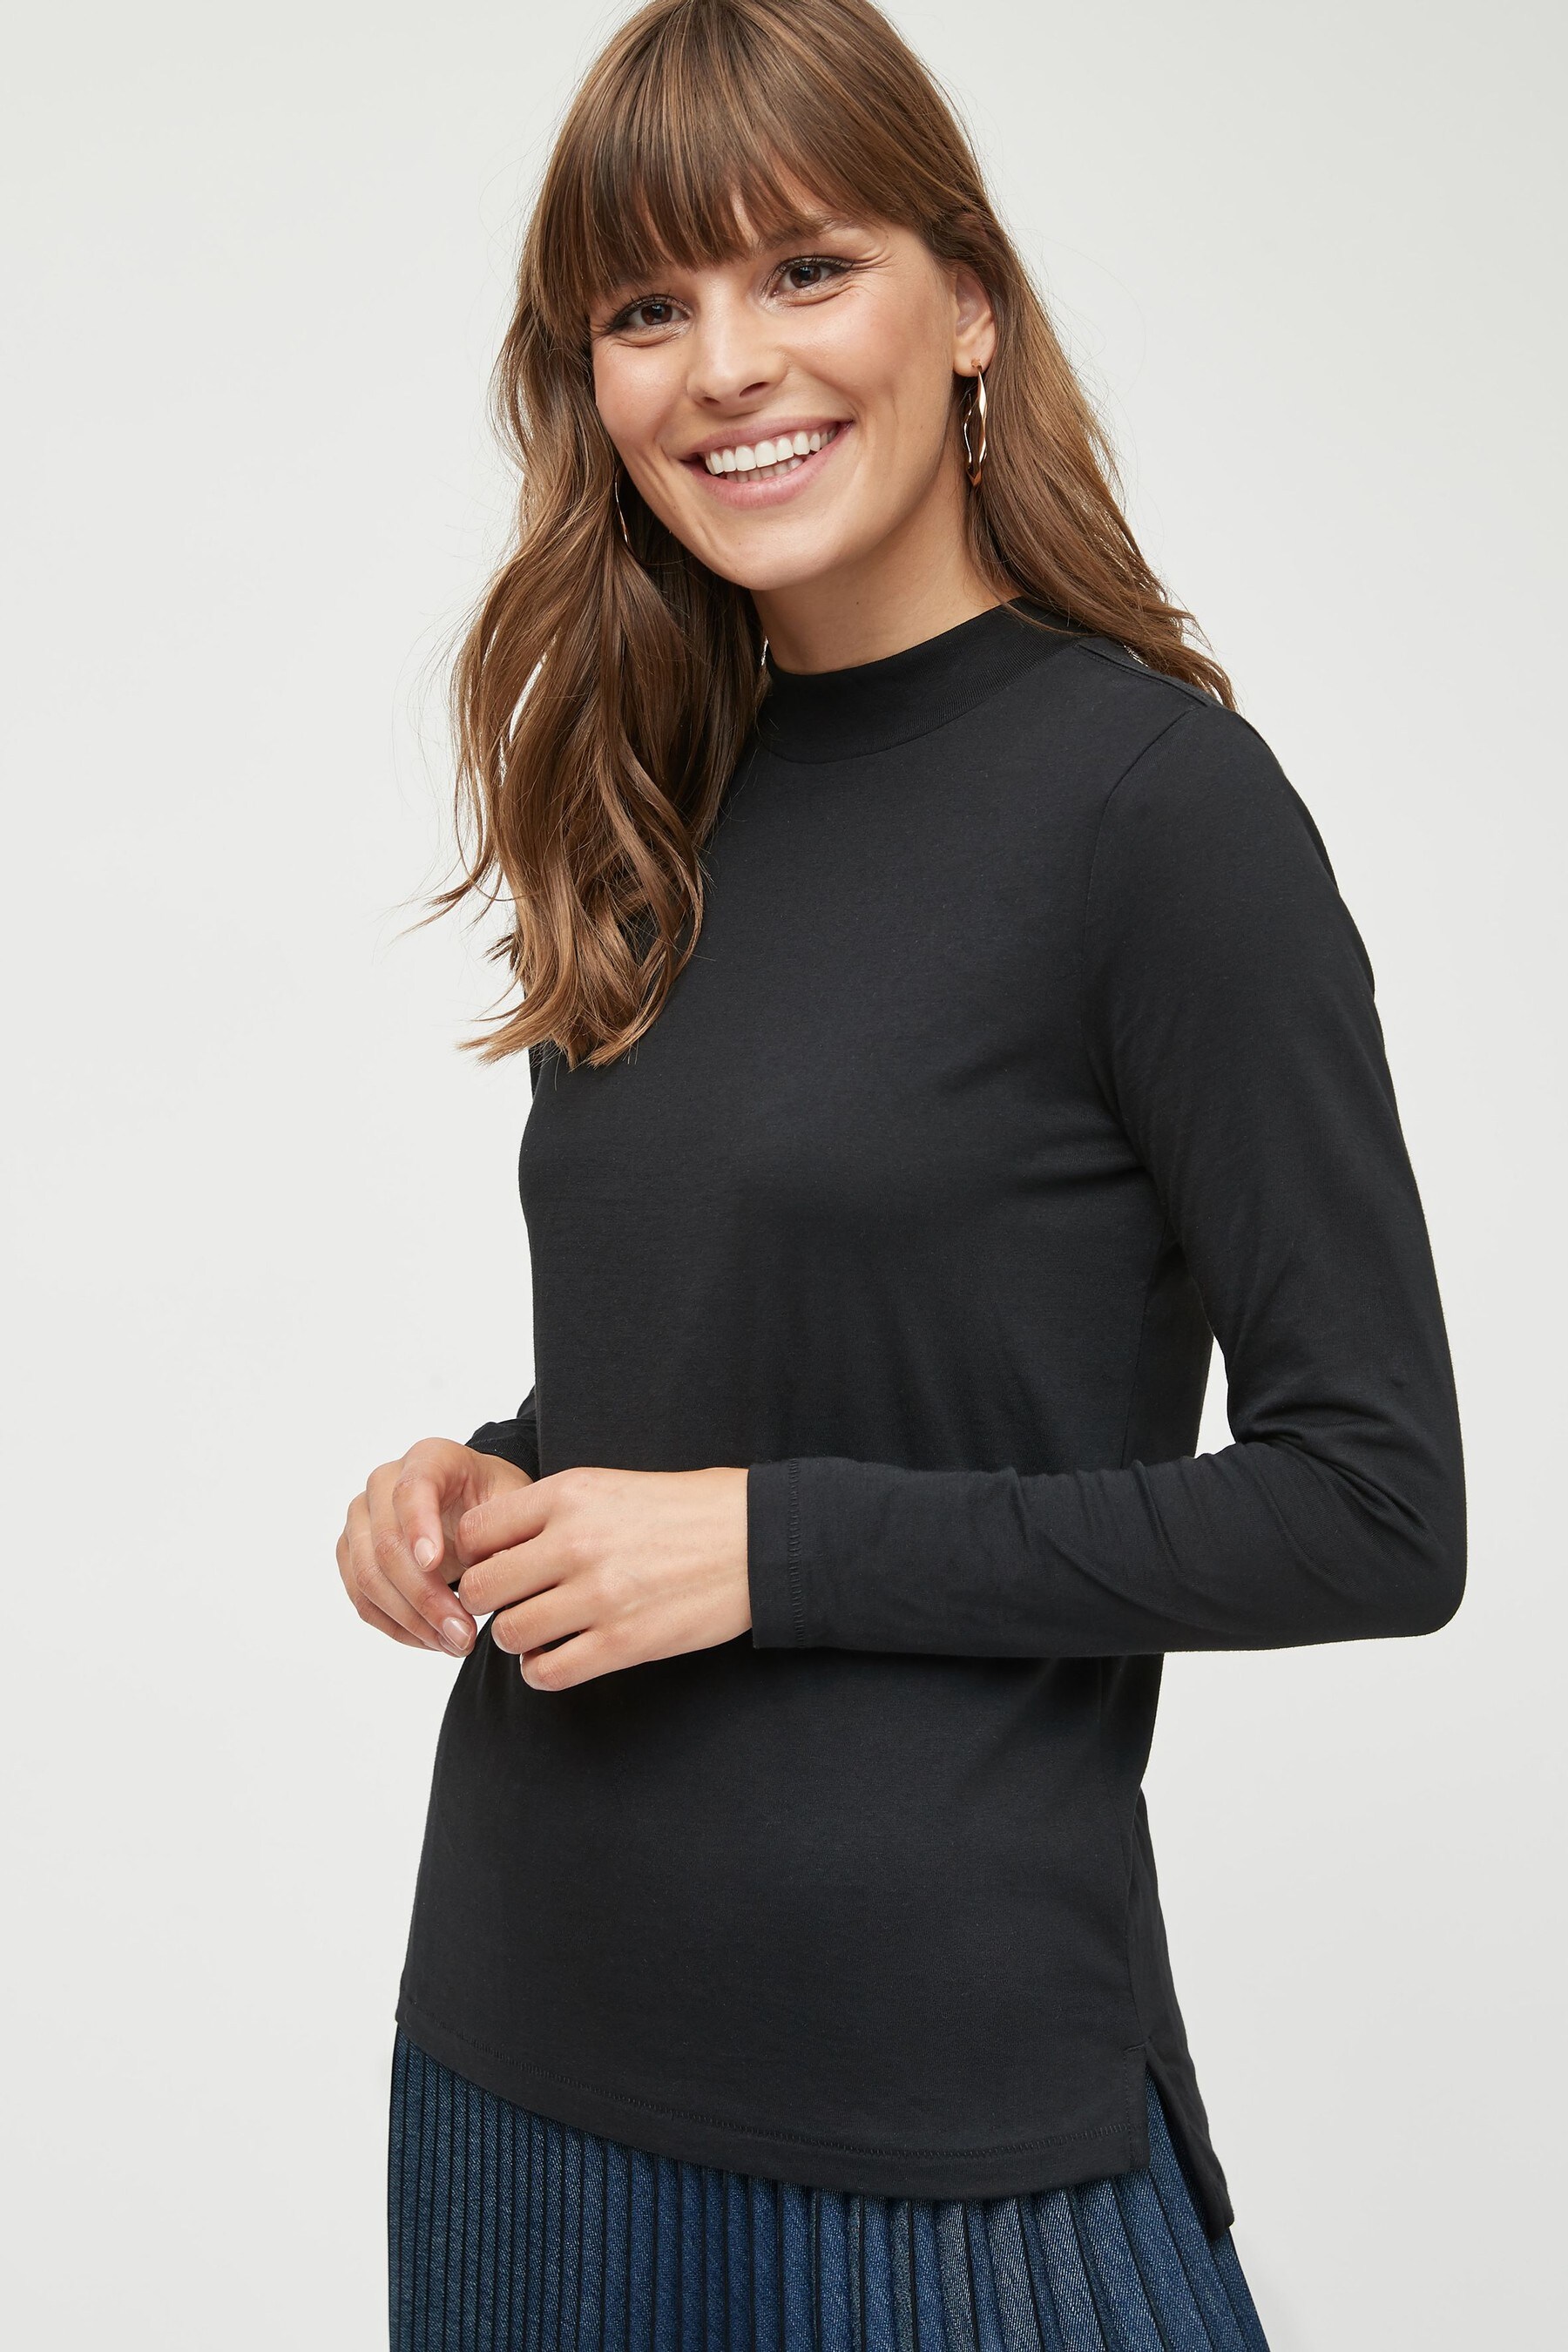 Buy Black High Neck Long Sleeve Top from the Next UK online shop